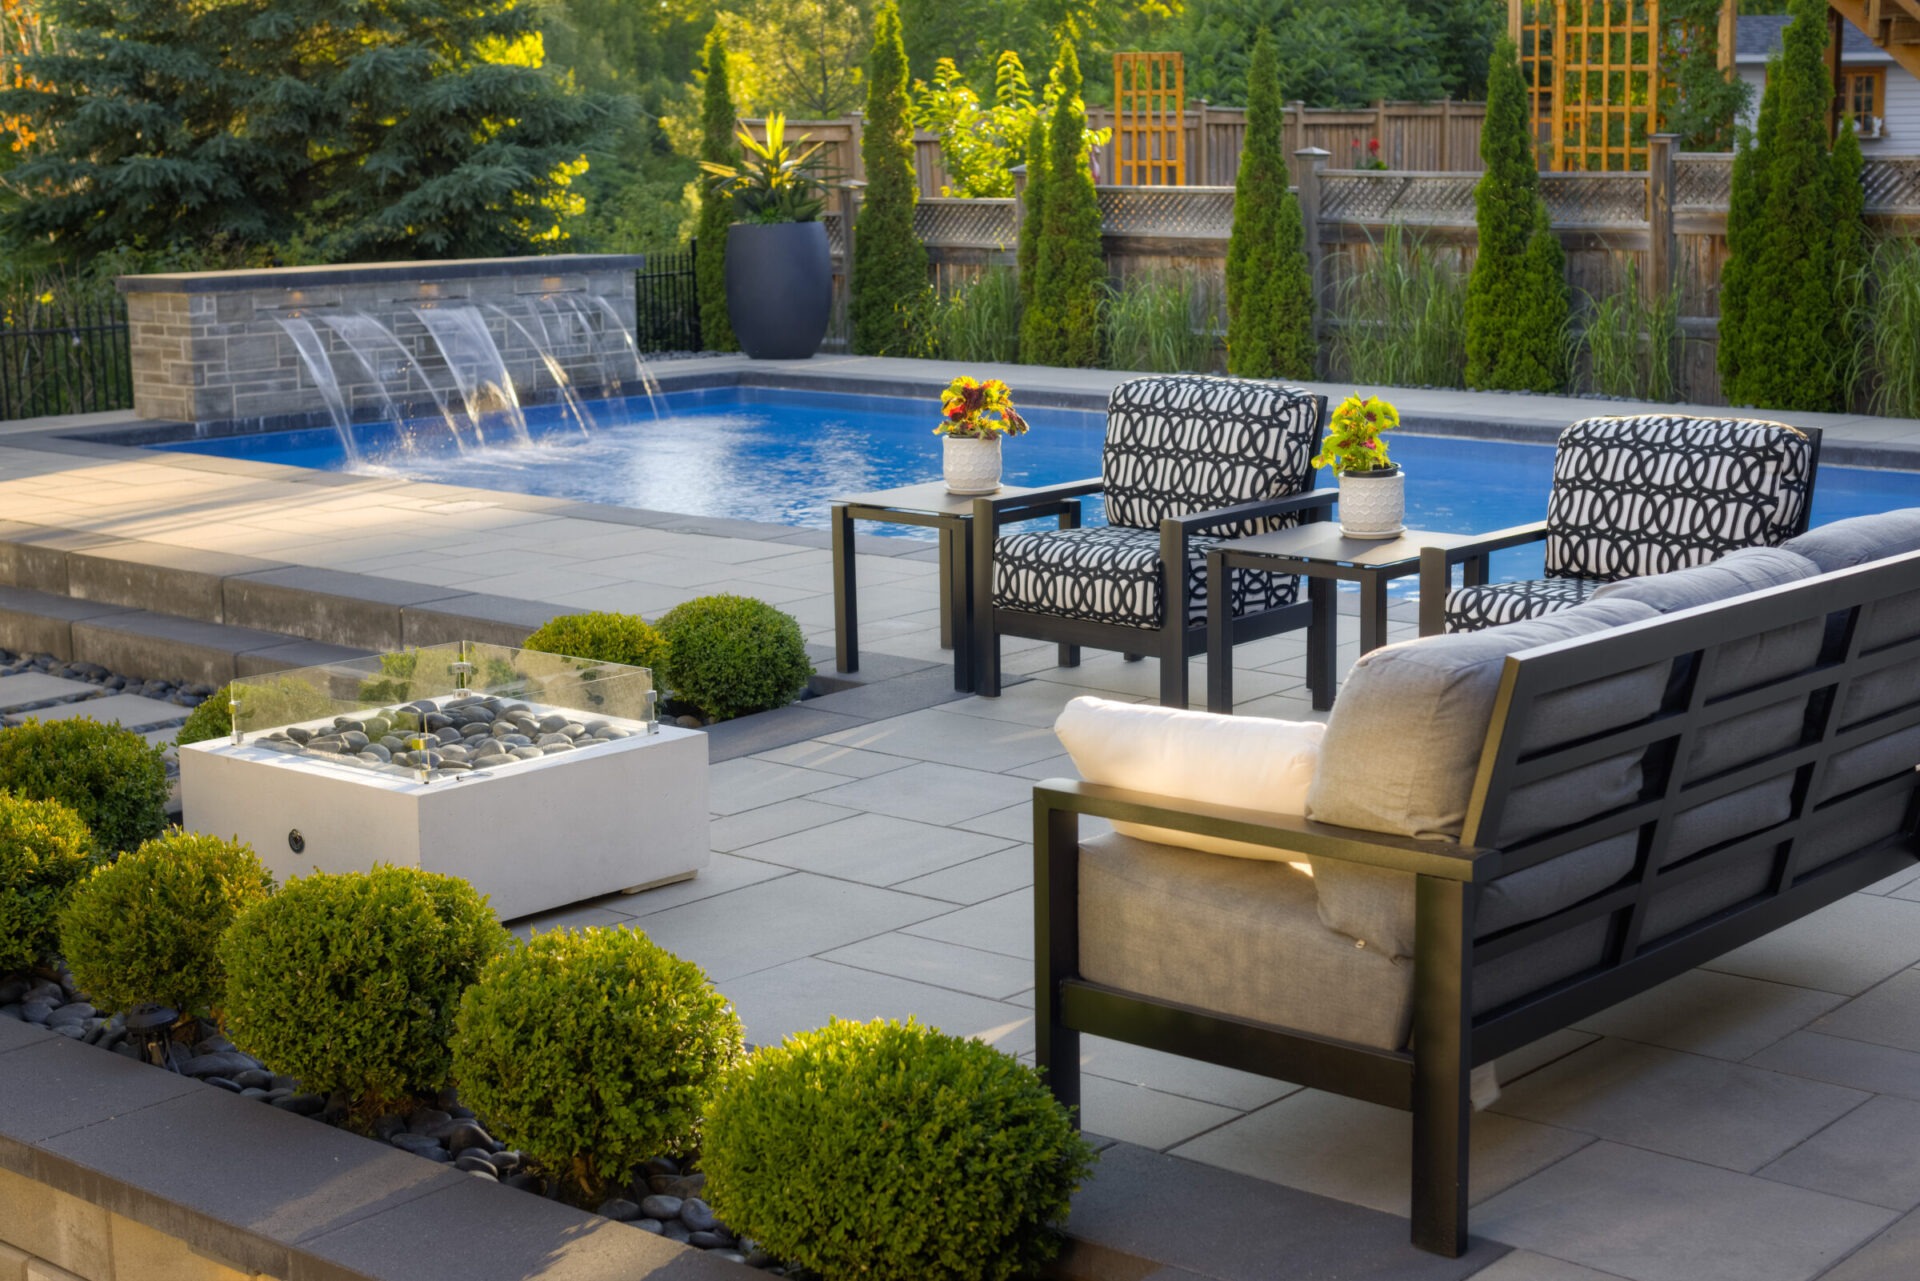 An inviting backyard with a rectangular blue swimming pool, water features, stylish outdoor furniture, manicured bushes, and a stone patio.